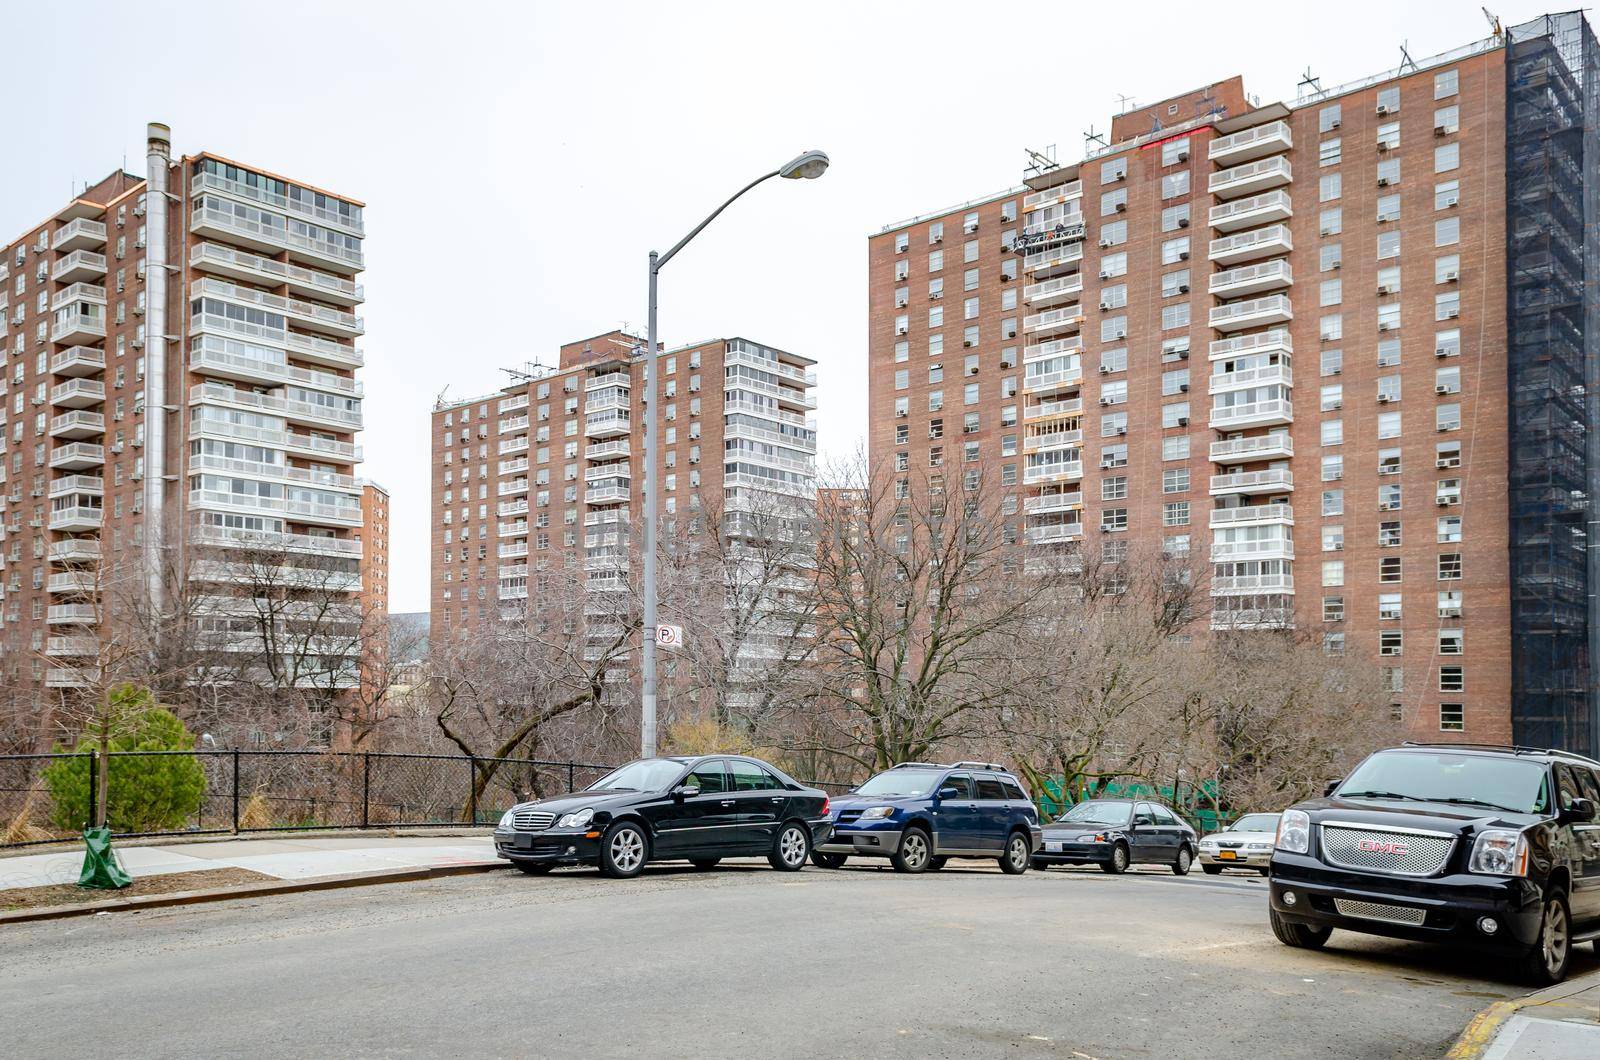 Residential Area with old brown apartment skyscrapers in Harlem, New York City, during winter day with overcast, Cars parked in the forefront on the street, horizontal